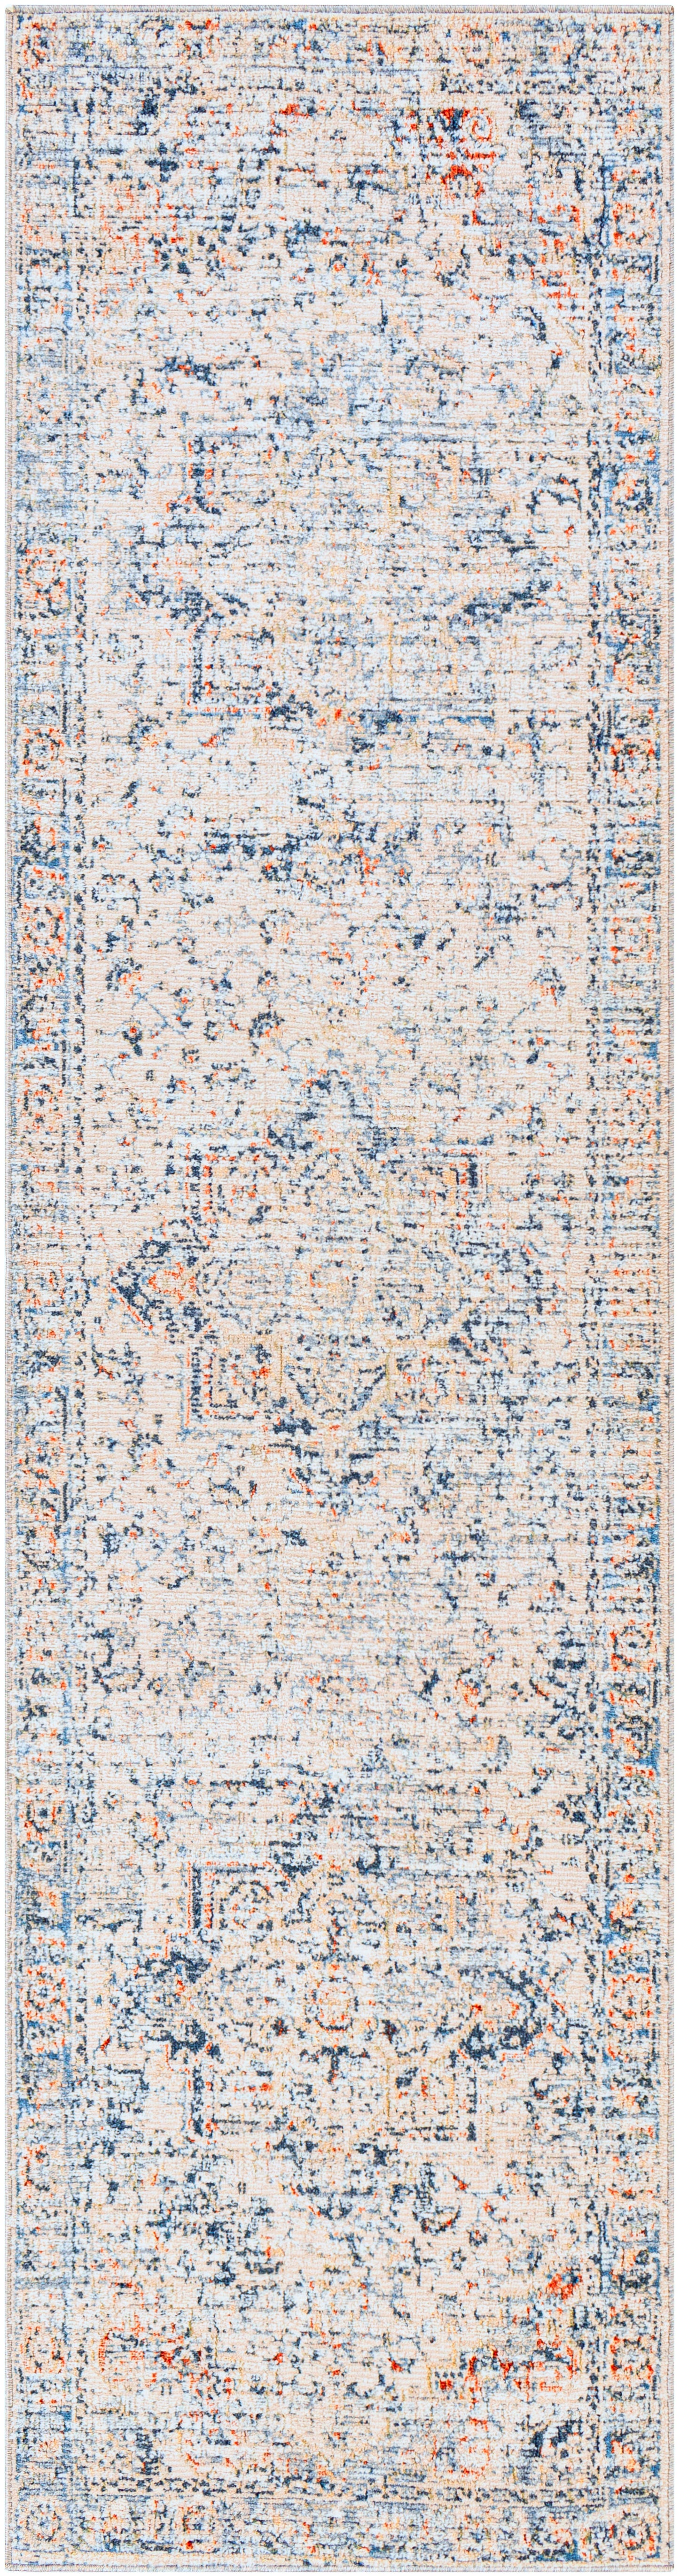 Amore 29626 Machine Woven Synthetic Blend Indoor Area Rug by Surya Rugs